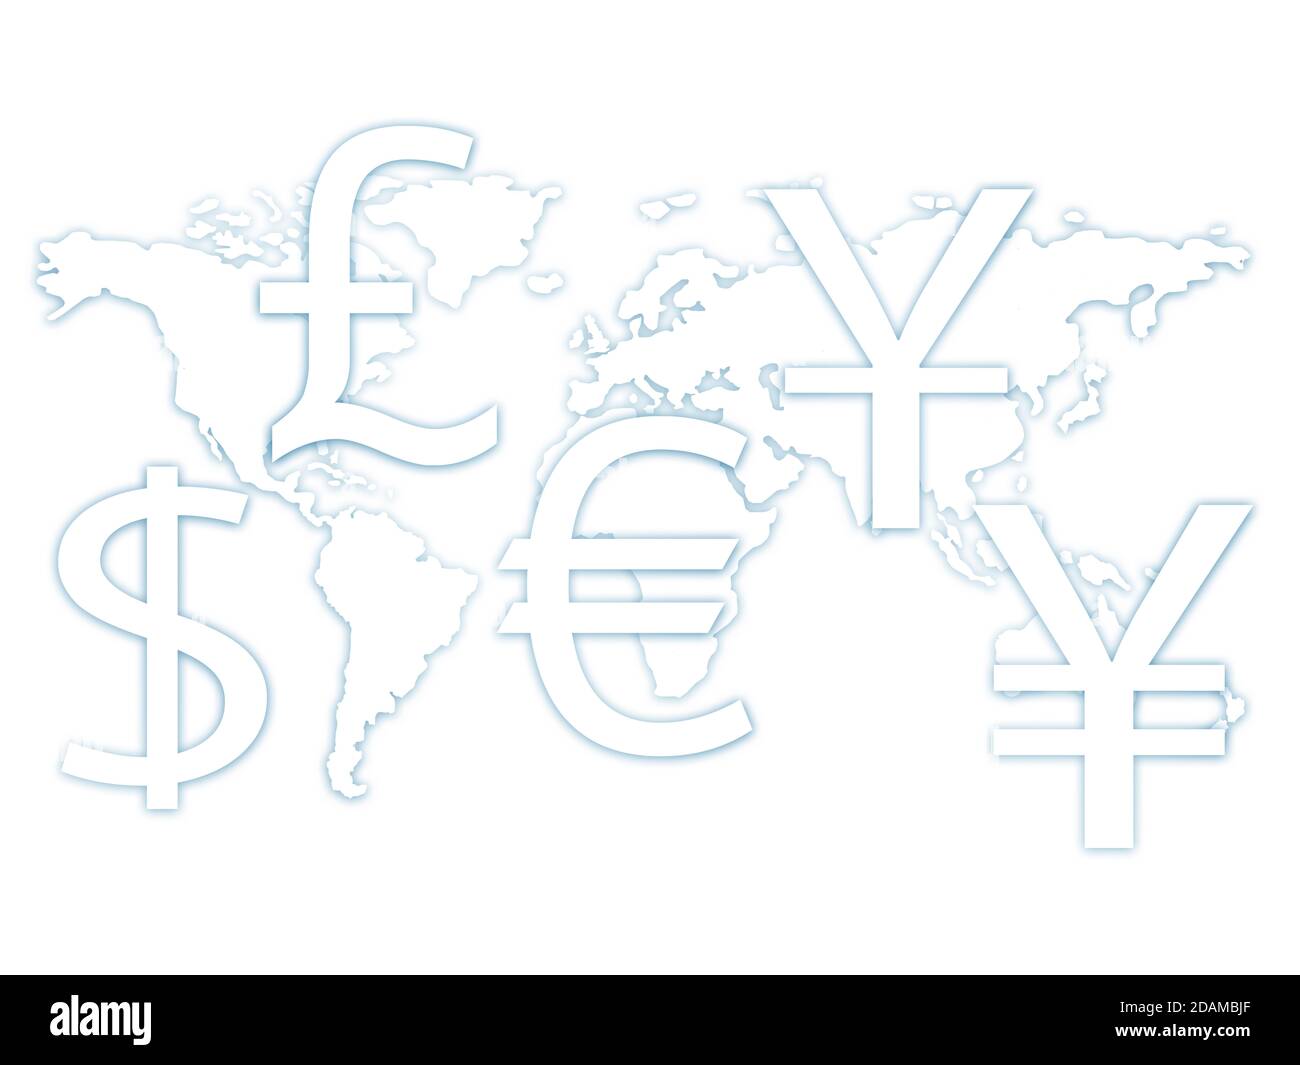 World map with currency symbols, illustration. Stock Photo